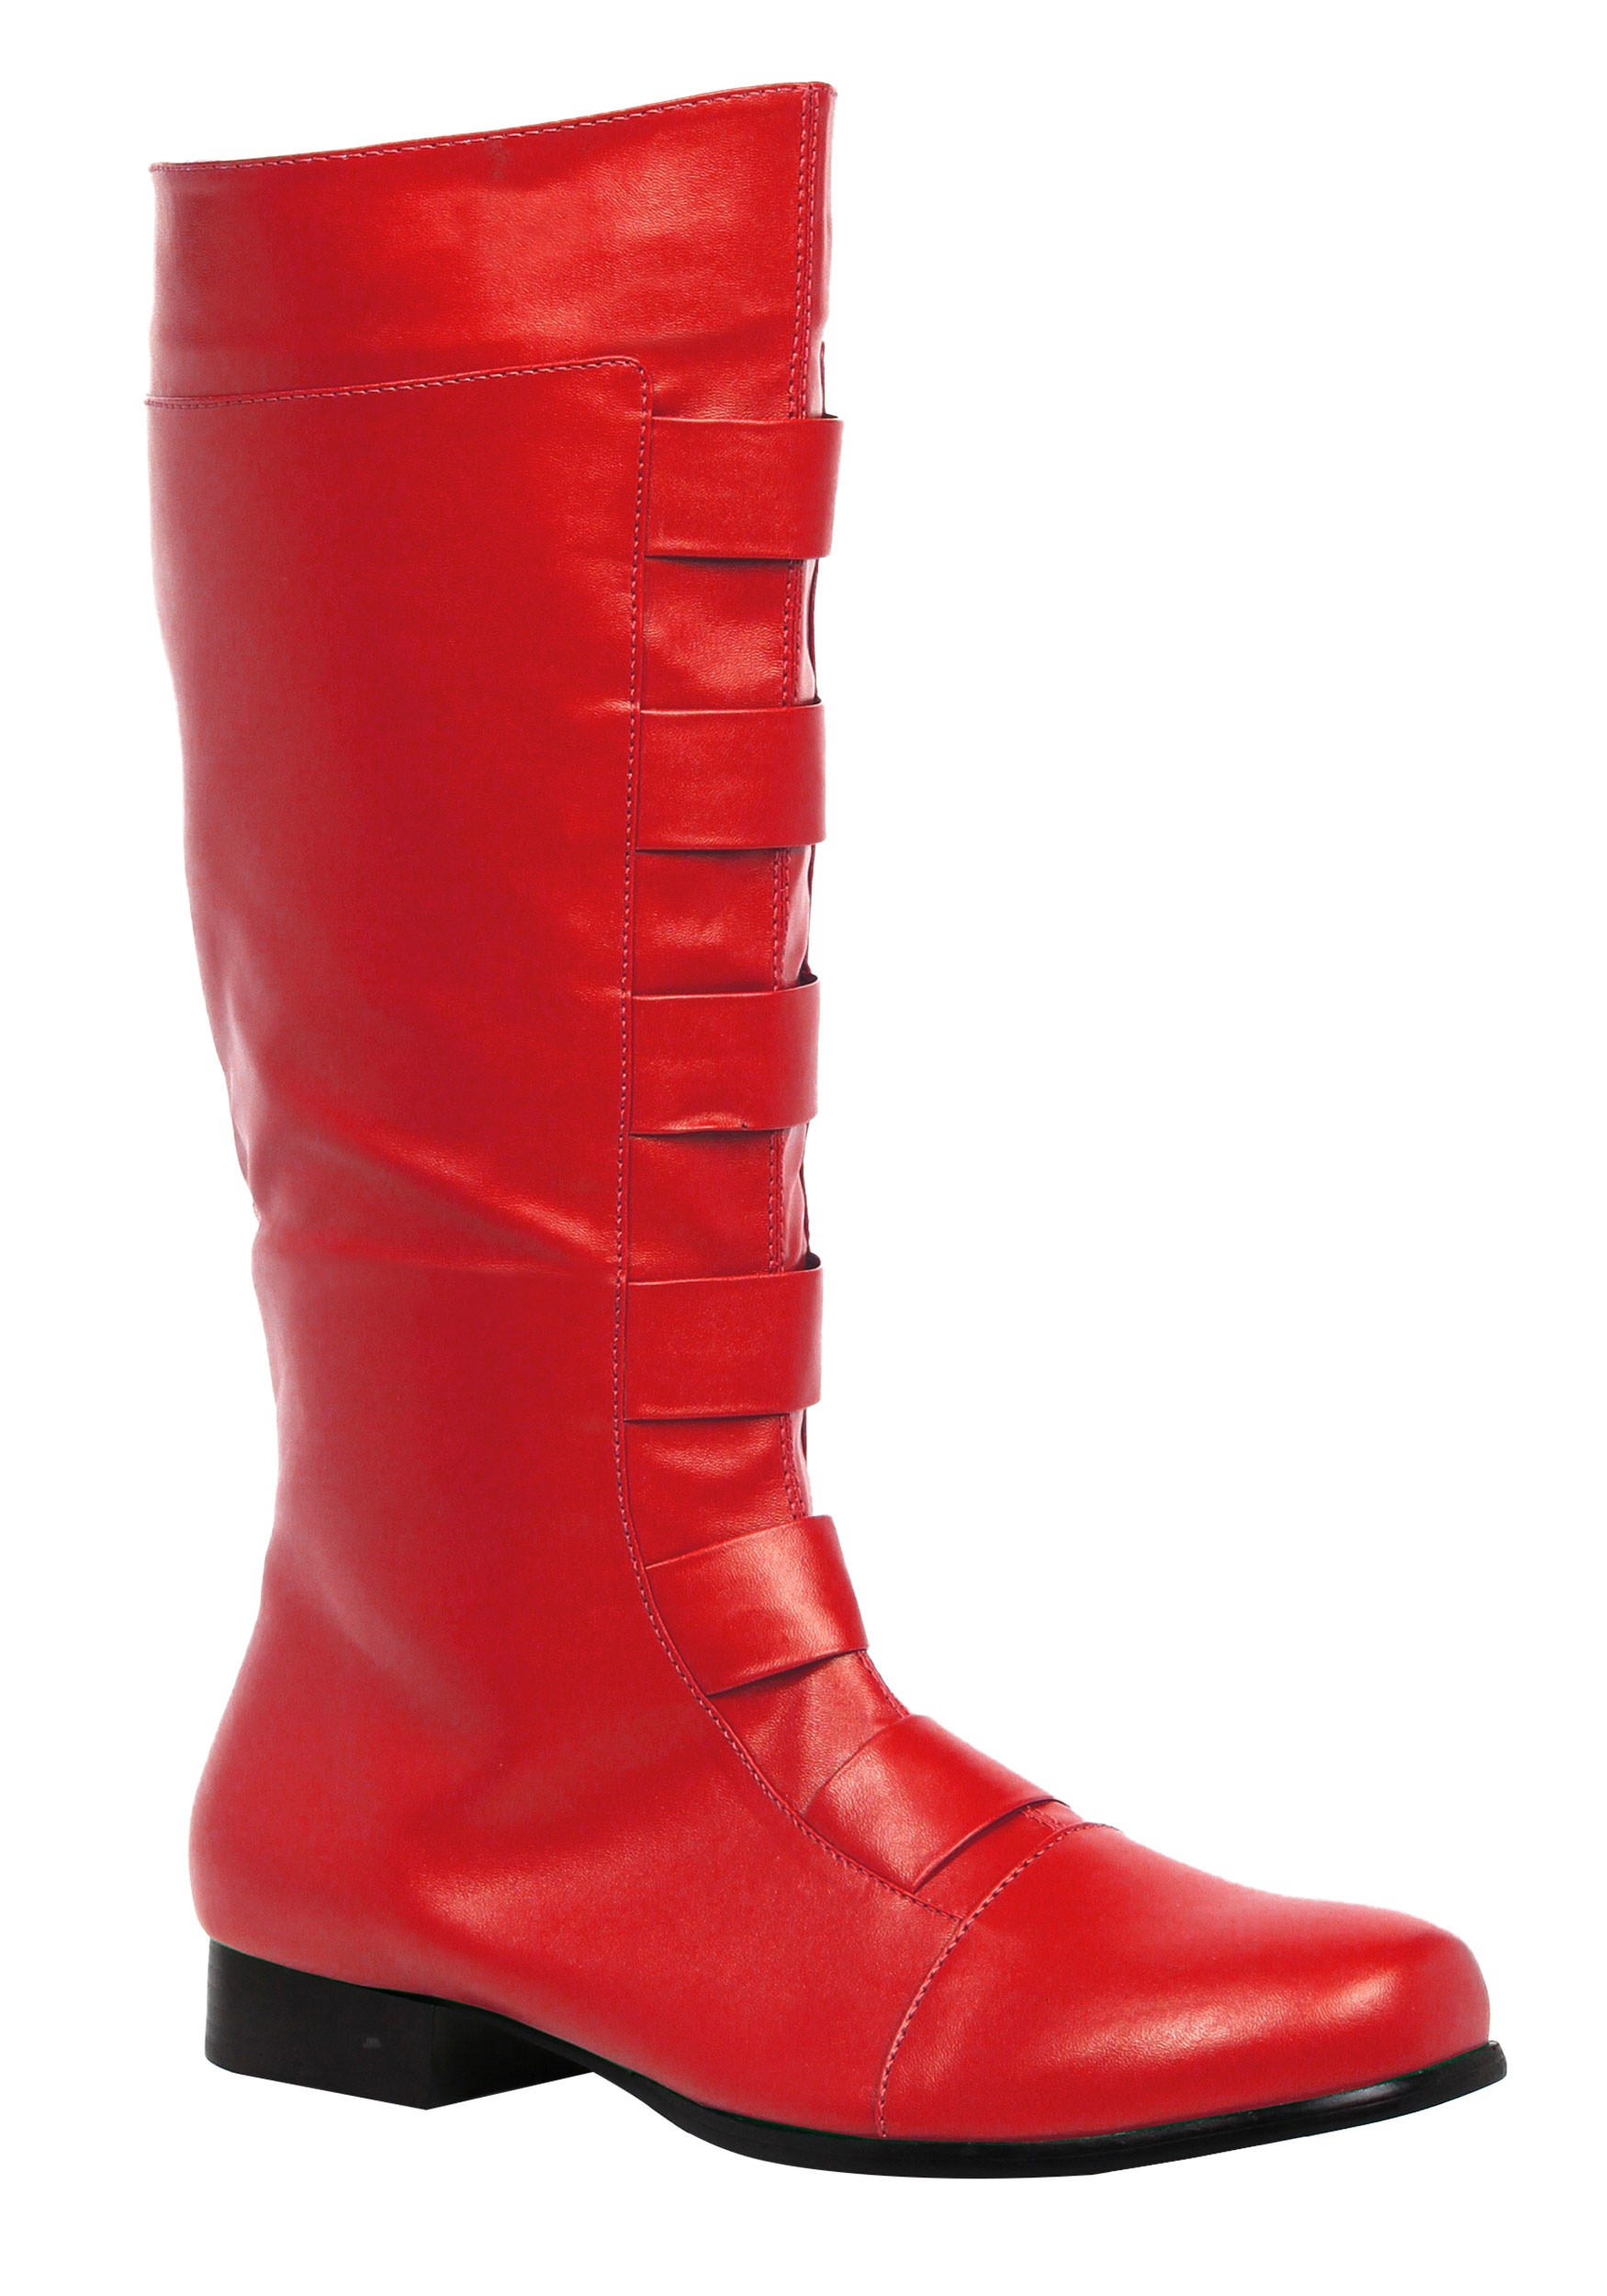 red riding boots